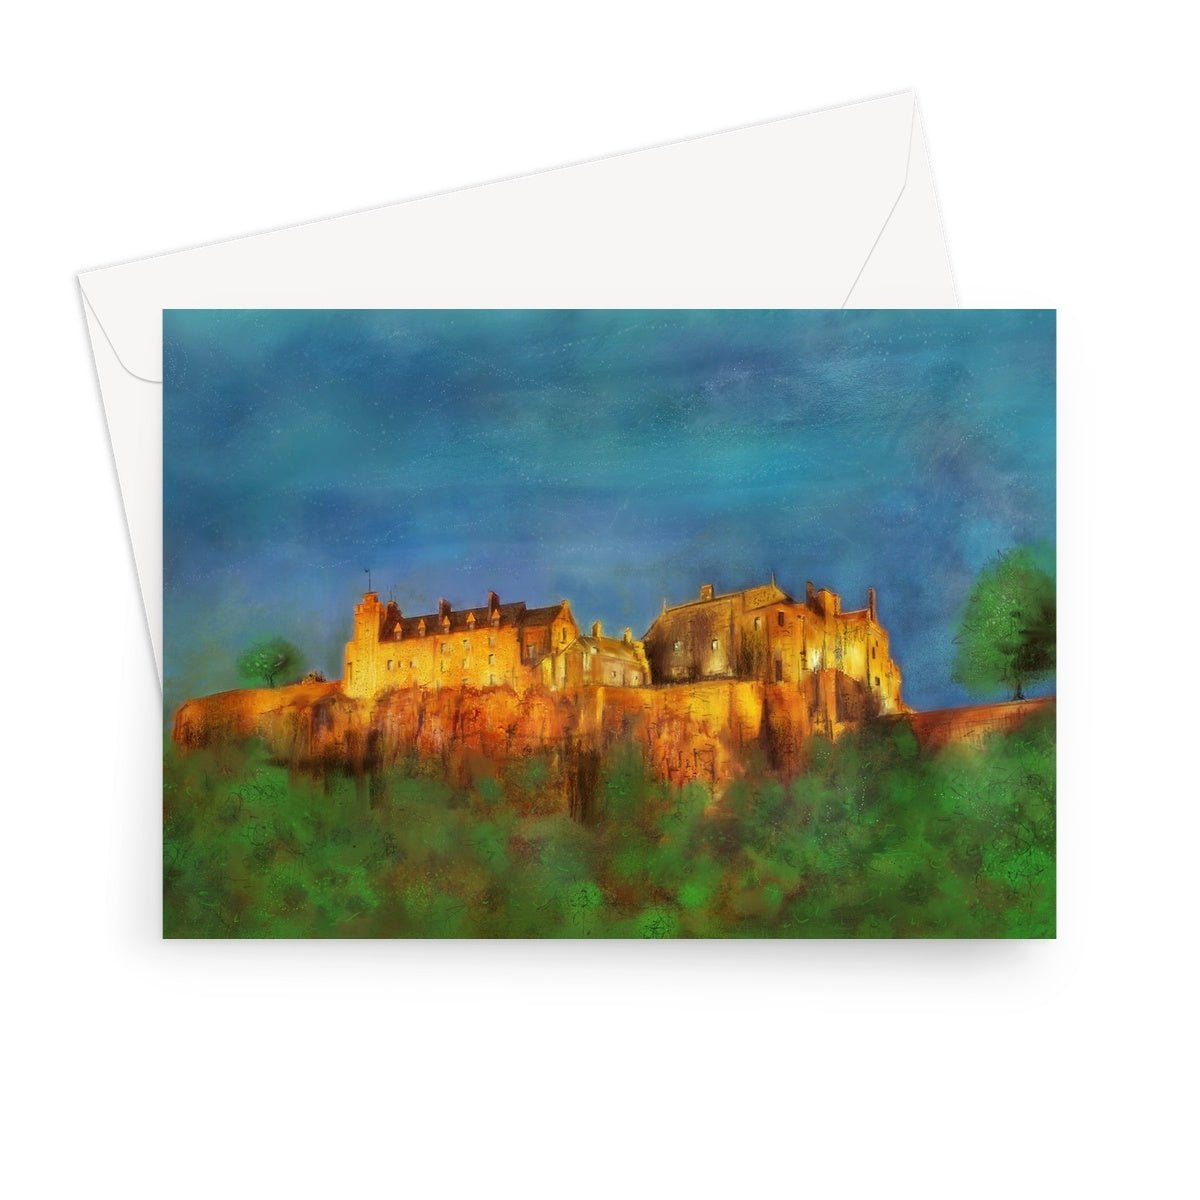 Stirling Castle Art Gifts Greeting Card-Greetings Cards-Scottish Castles Art Gallery-7"x5"-1 Card-Paintings, Prints, Homeware, Art Gifts From Scotland By Scottish Artist Kevin Hunter